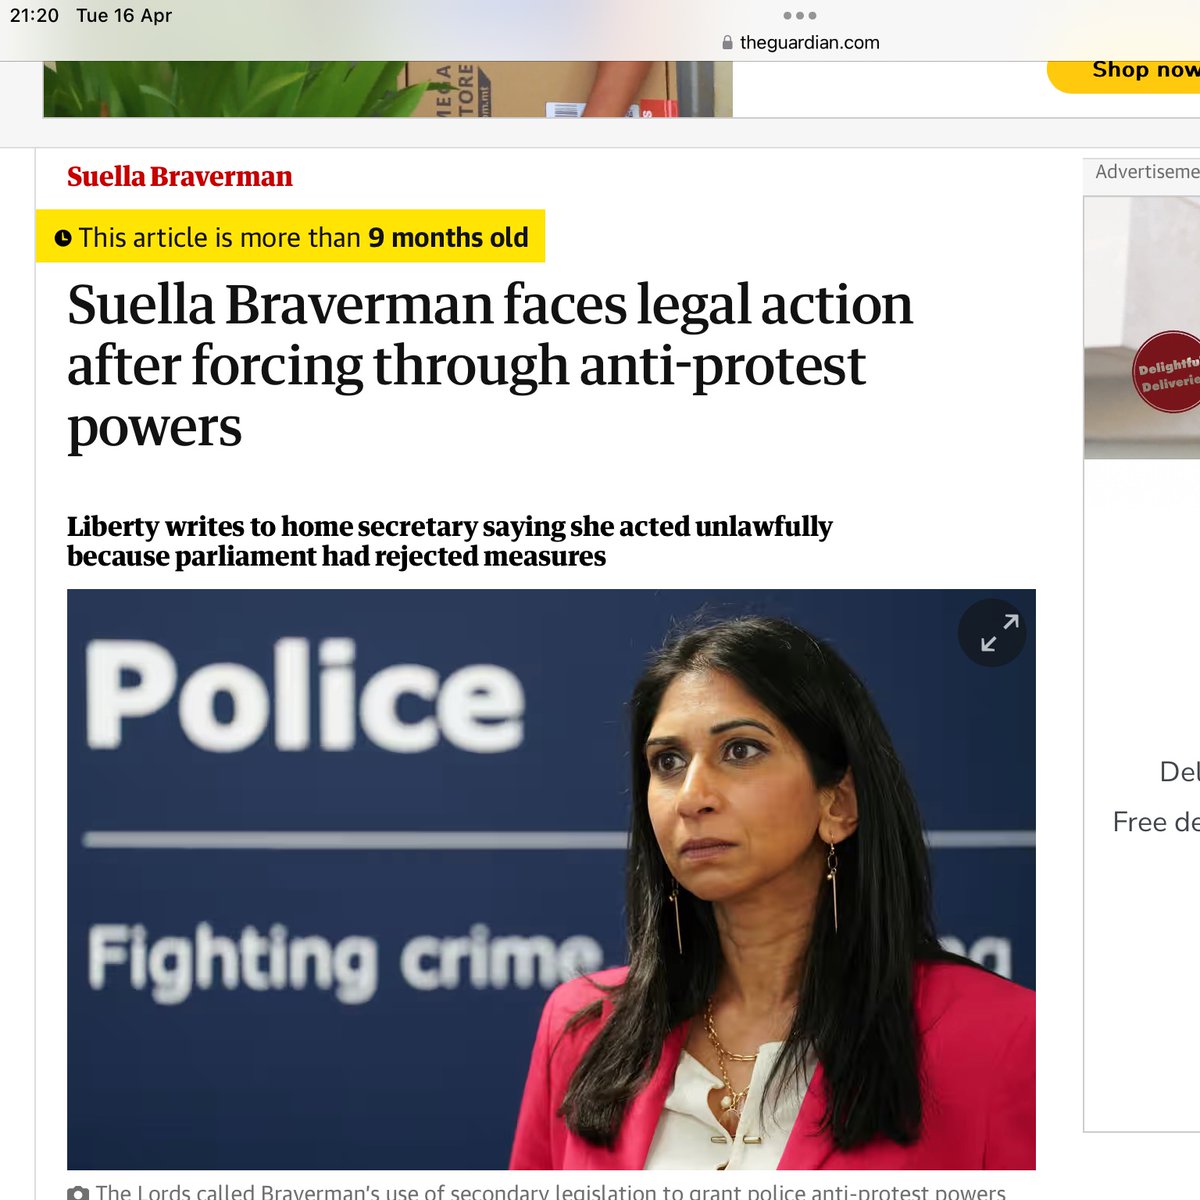 Whilst @SuellaBraverman protests in somebody else’s country, let’s remember what she tried to do to us!

#Hypocrisy